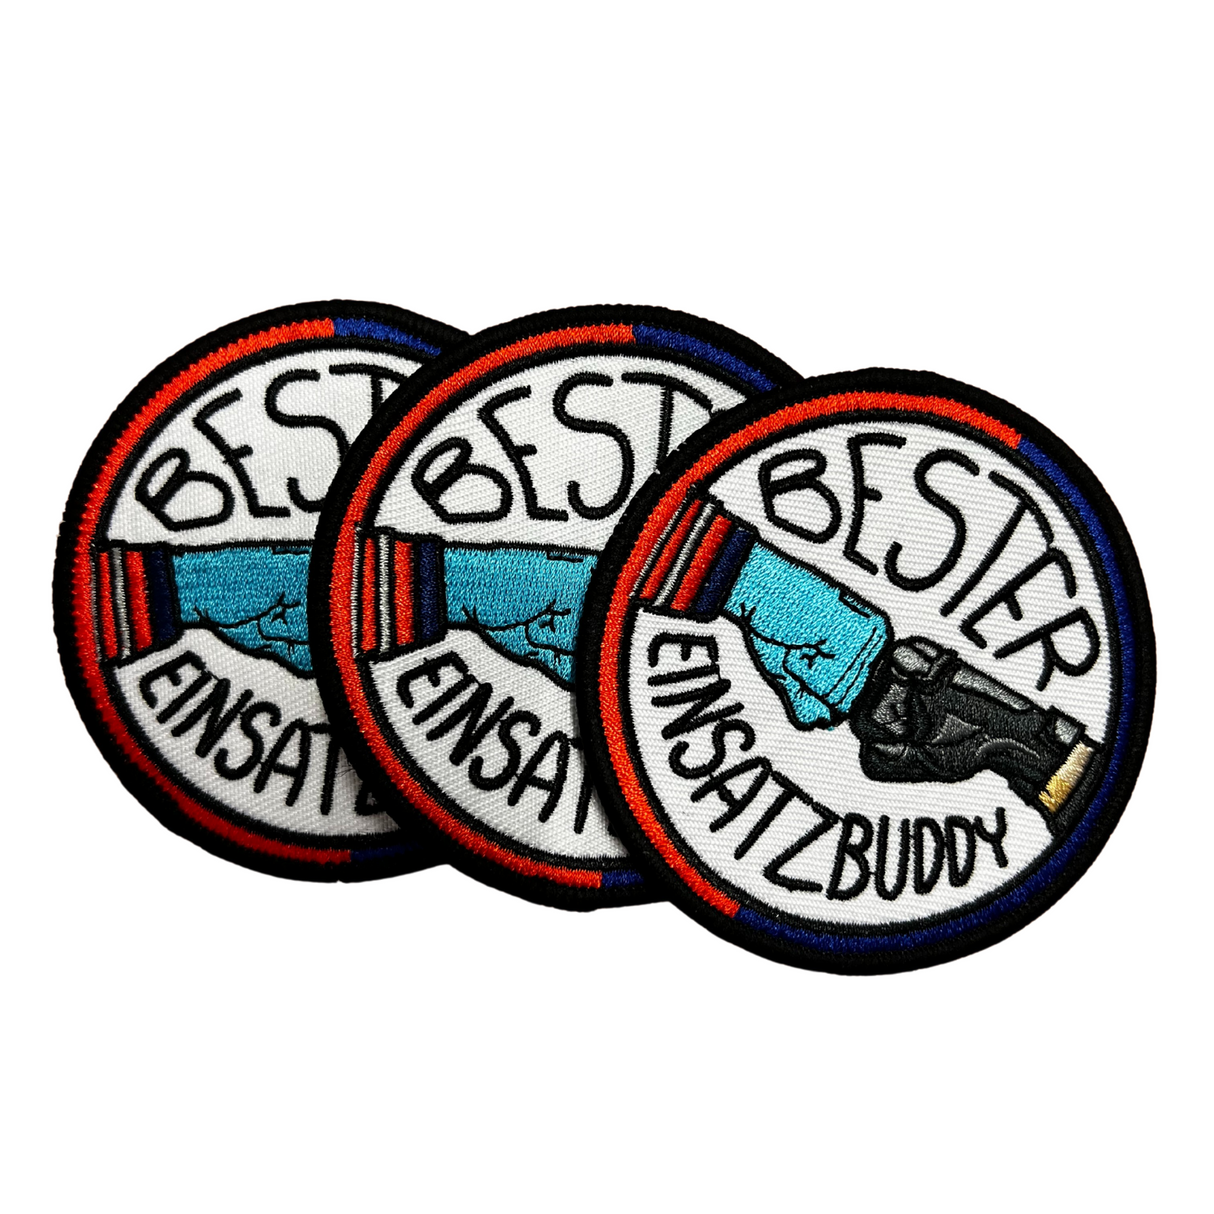 Rescue/Police Best Buddy Textile Patch